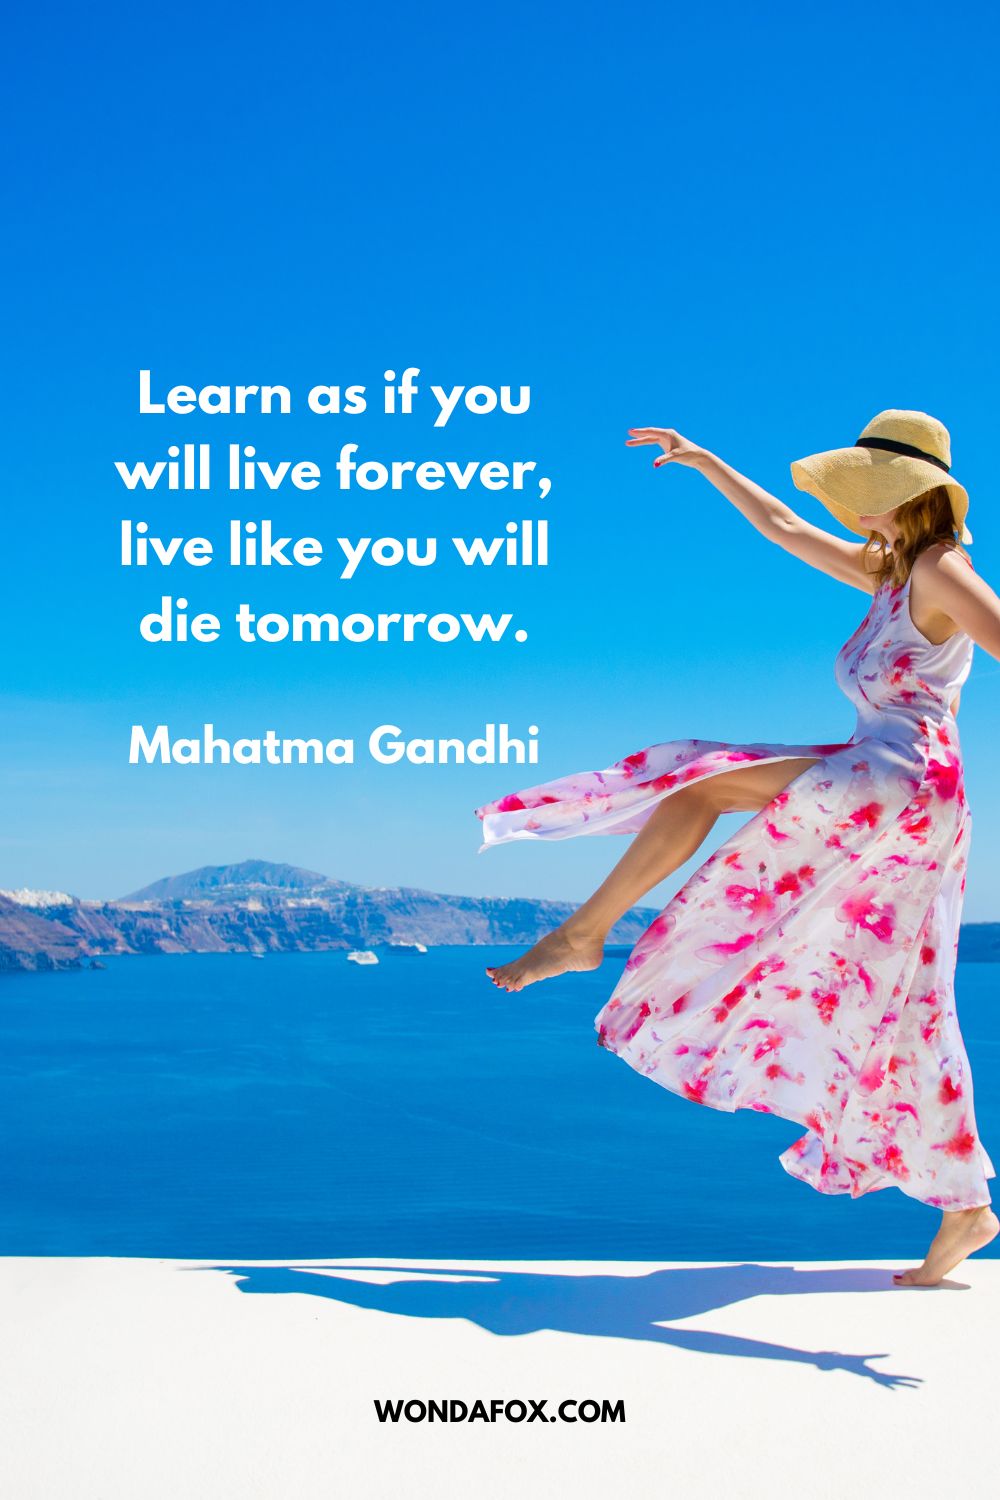 Learn as if you will live forever, live like you will die tomorrow. Mahatma Gandhi